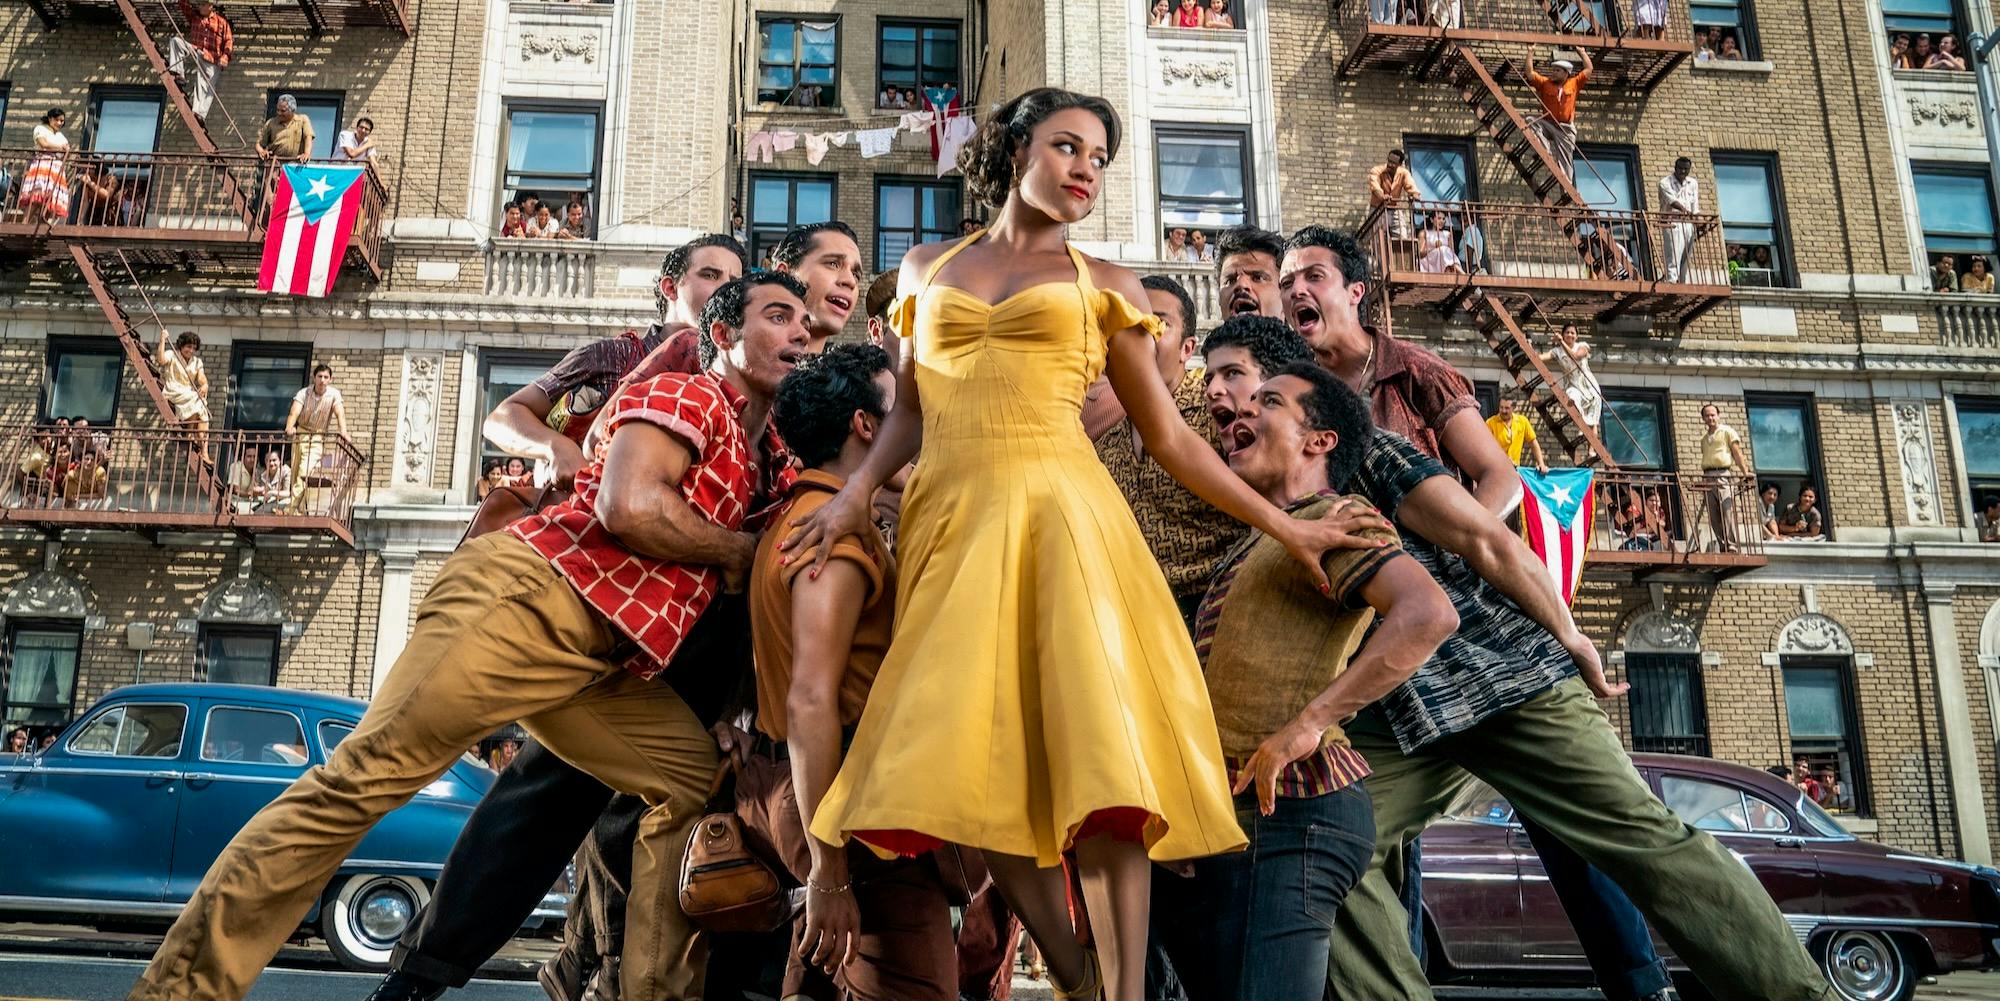 ariana debose (center) surrounded by a group of performers in west side story